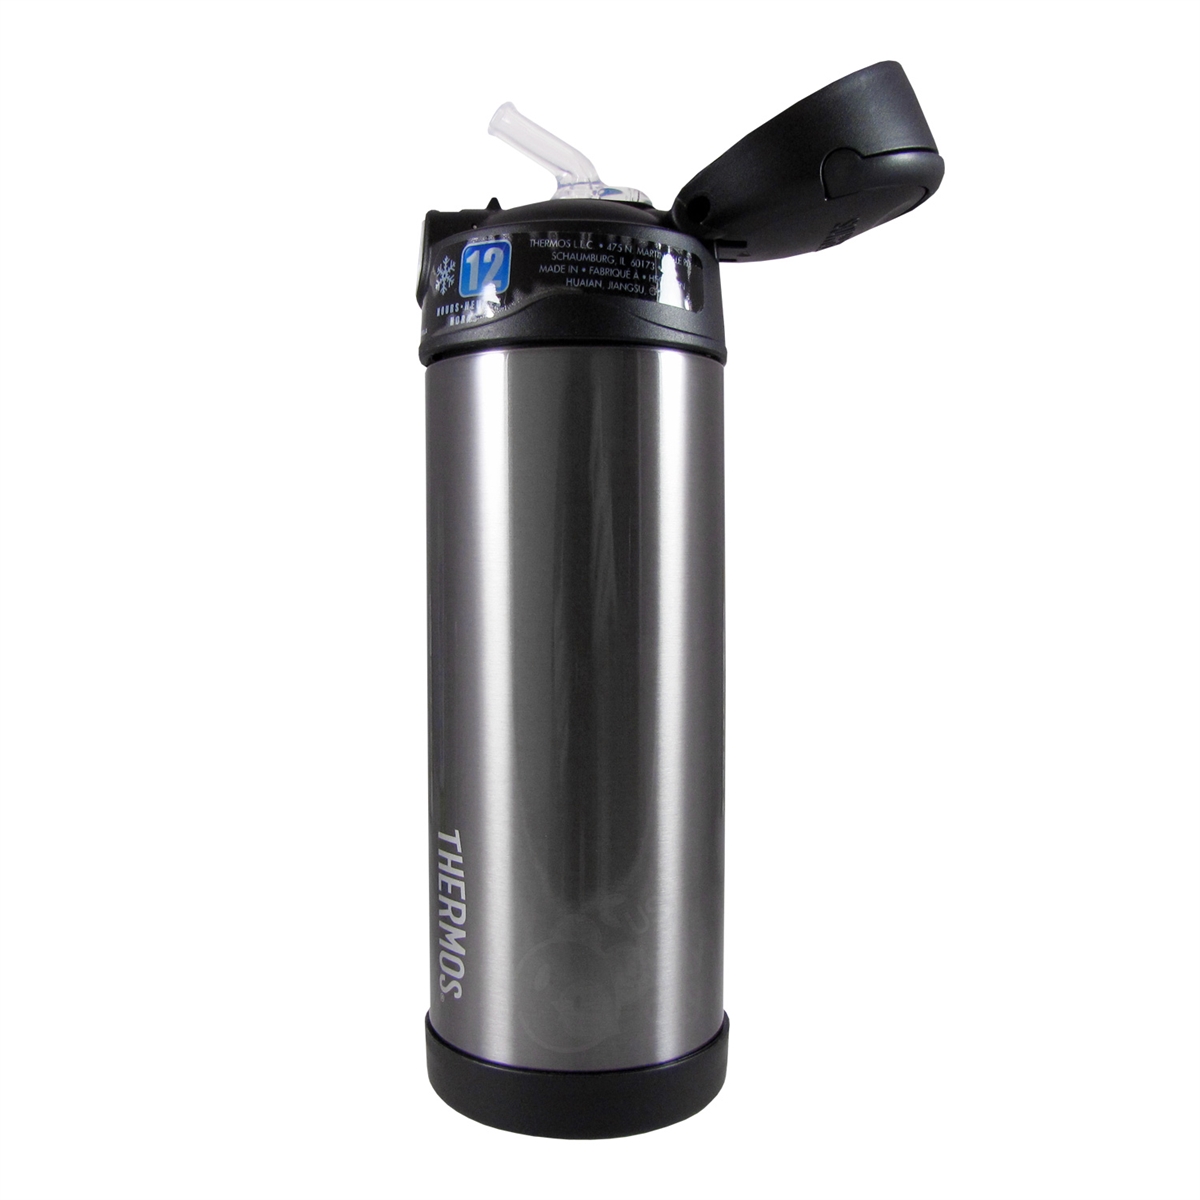 Thermos Funtainer 12 Ounce Bottle, Charcoal